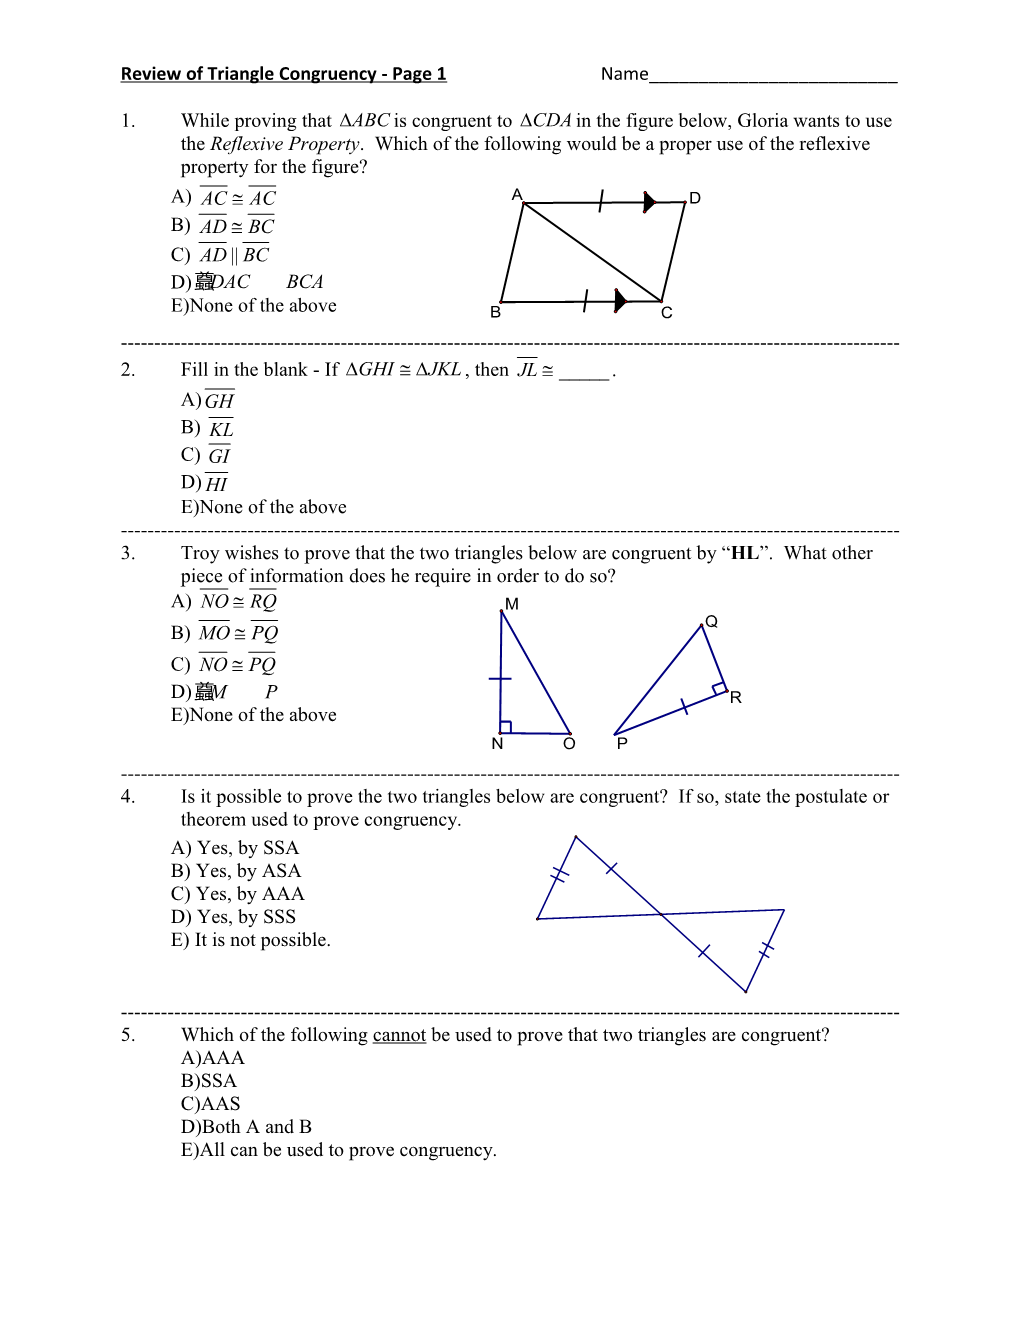 Congruency of Triangles (A)